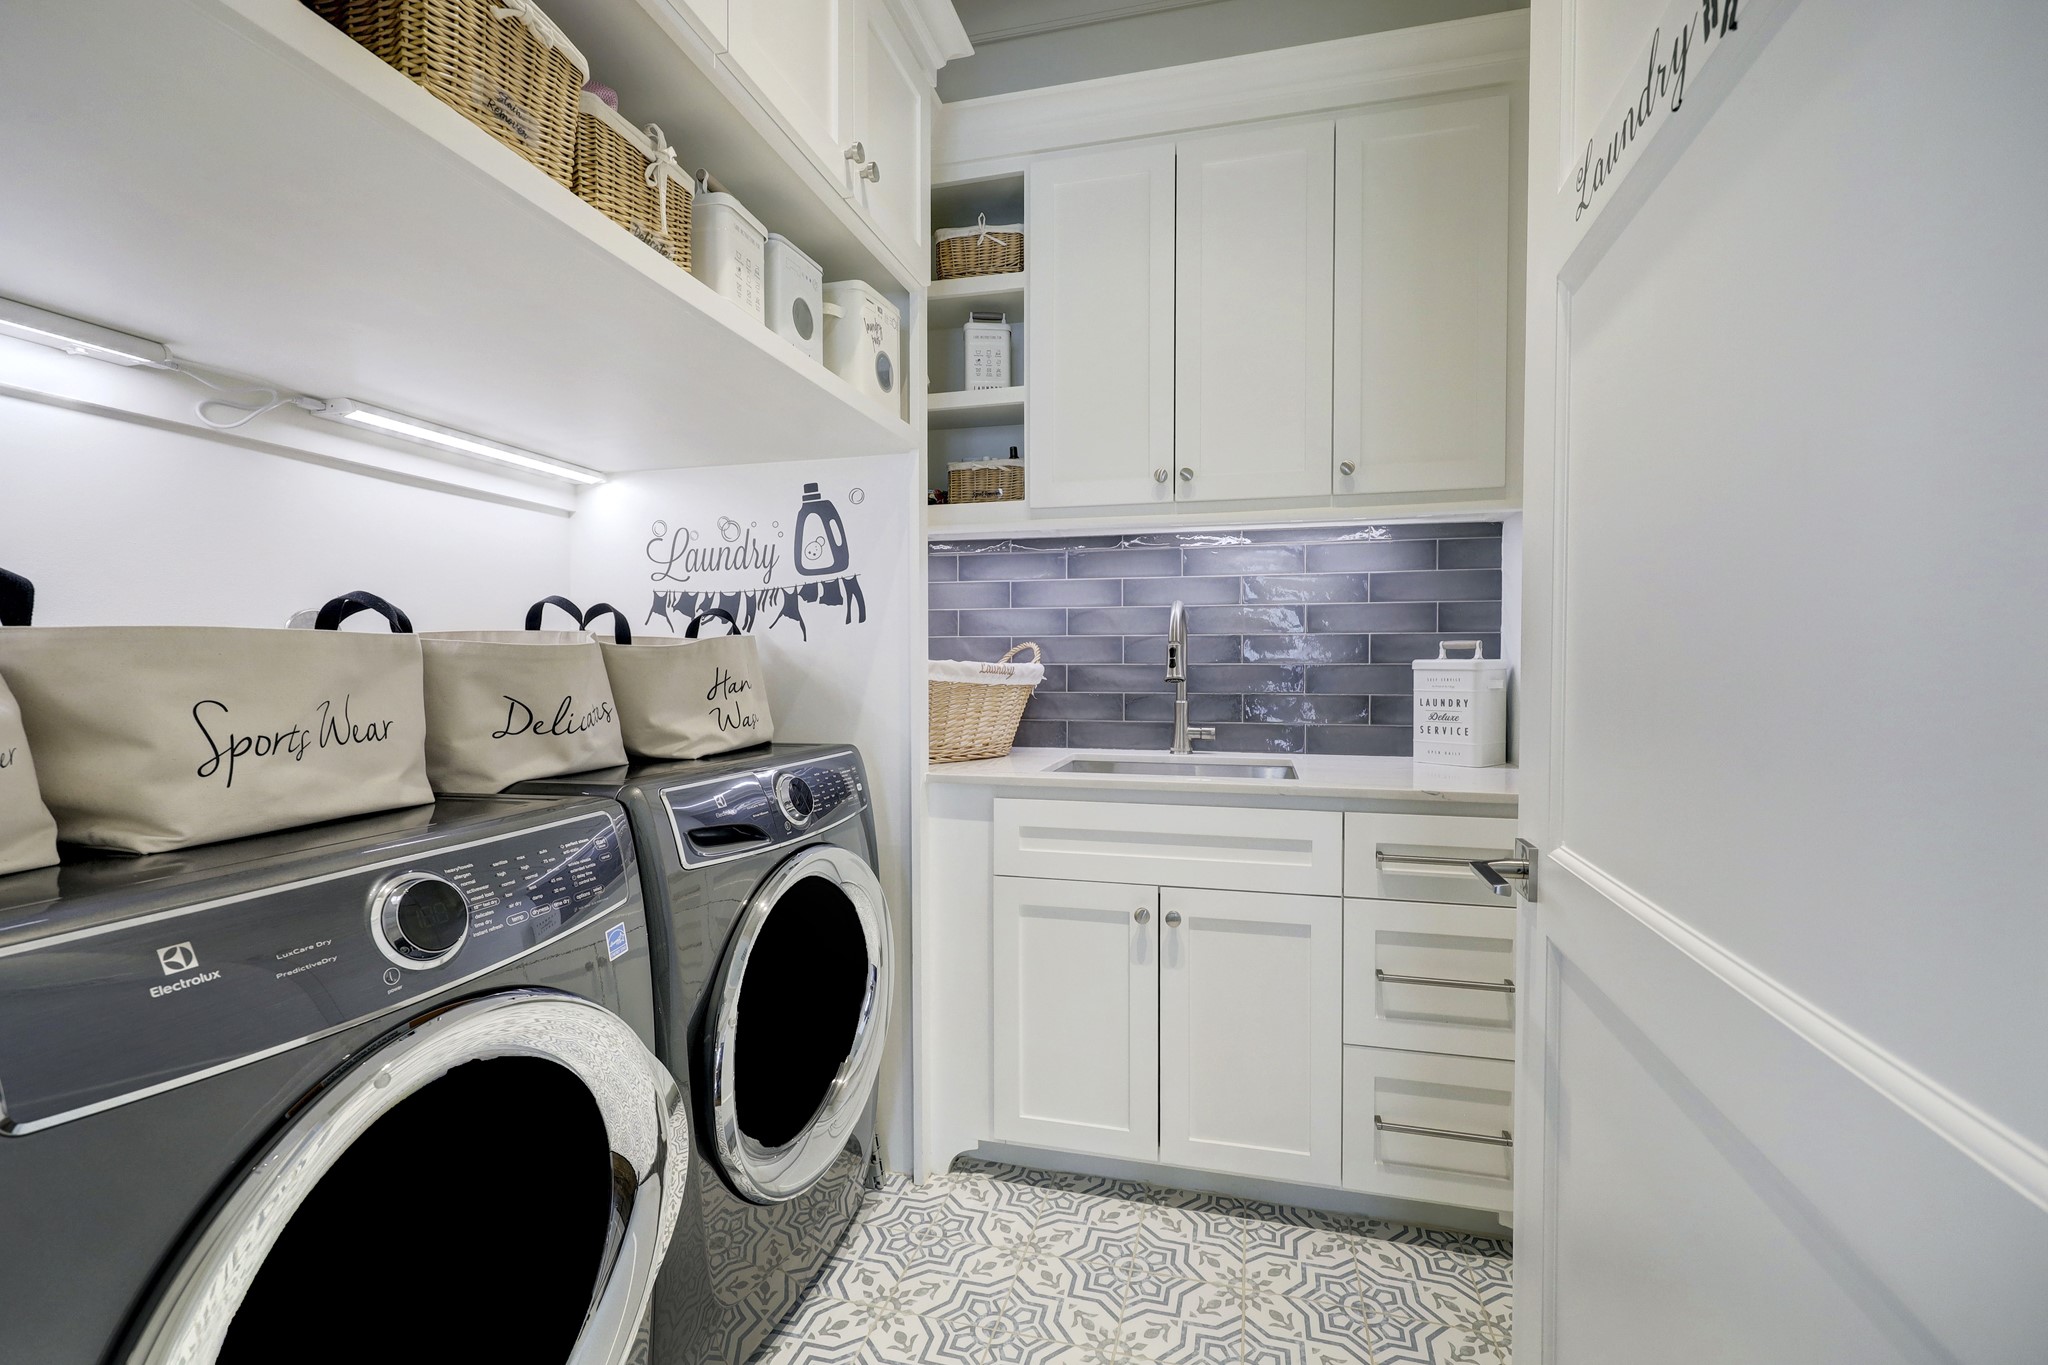 Centrally located, expansive laundry room with sink,
abundant storage, and
charming tile floor.